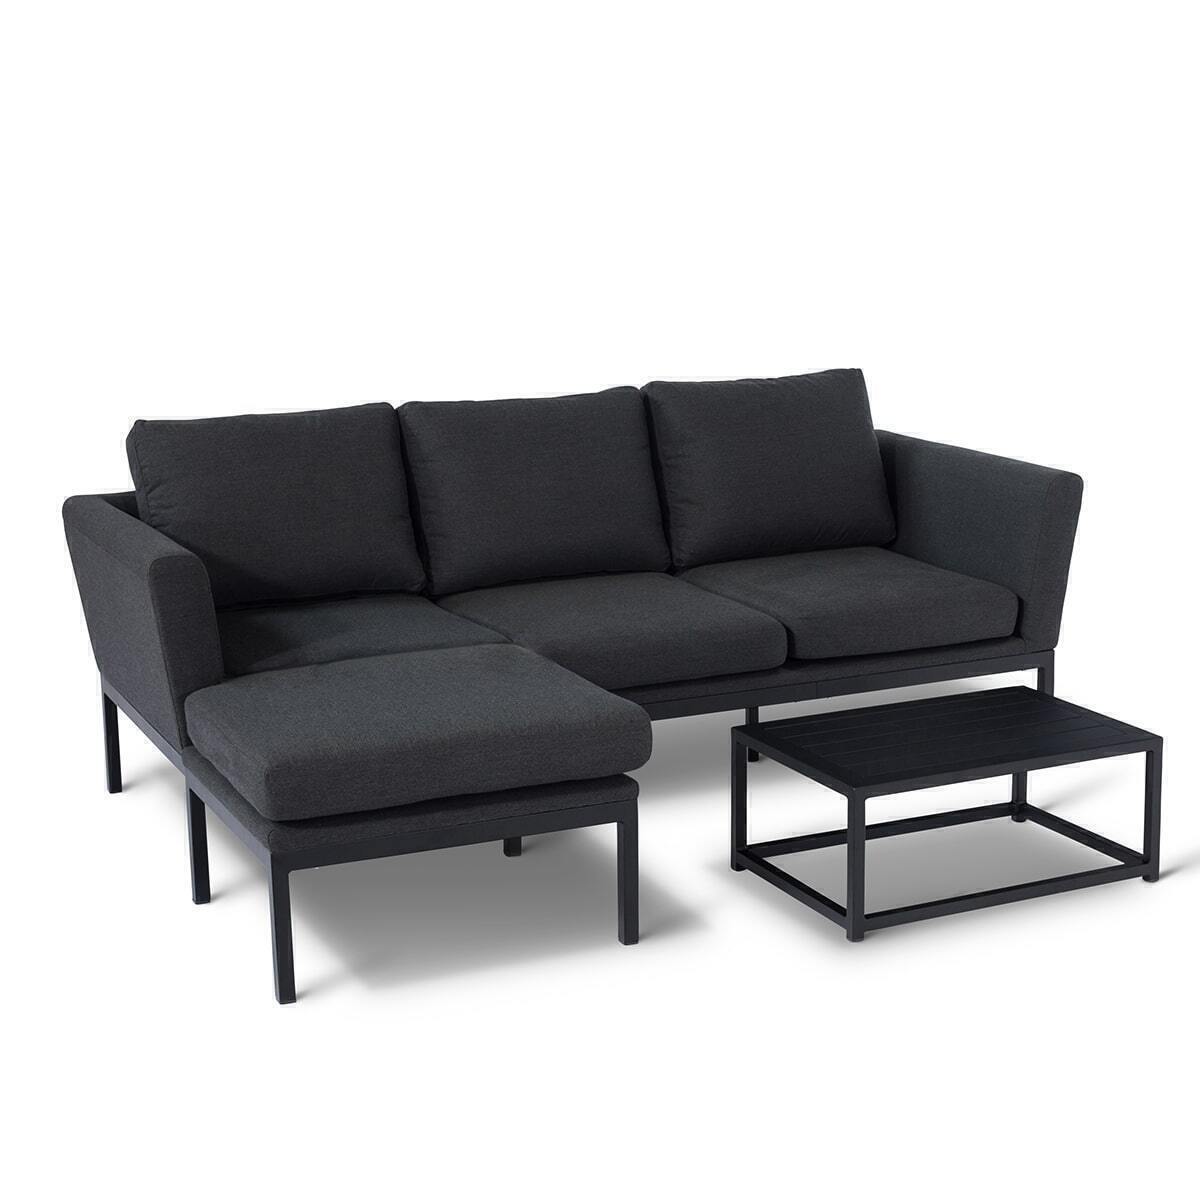 Maze - Outdoor Fabric Pulse Chaise Sofa Set - Charcoal product image